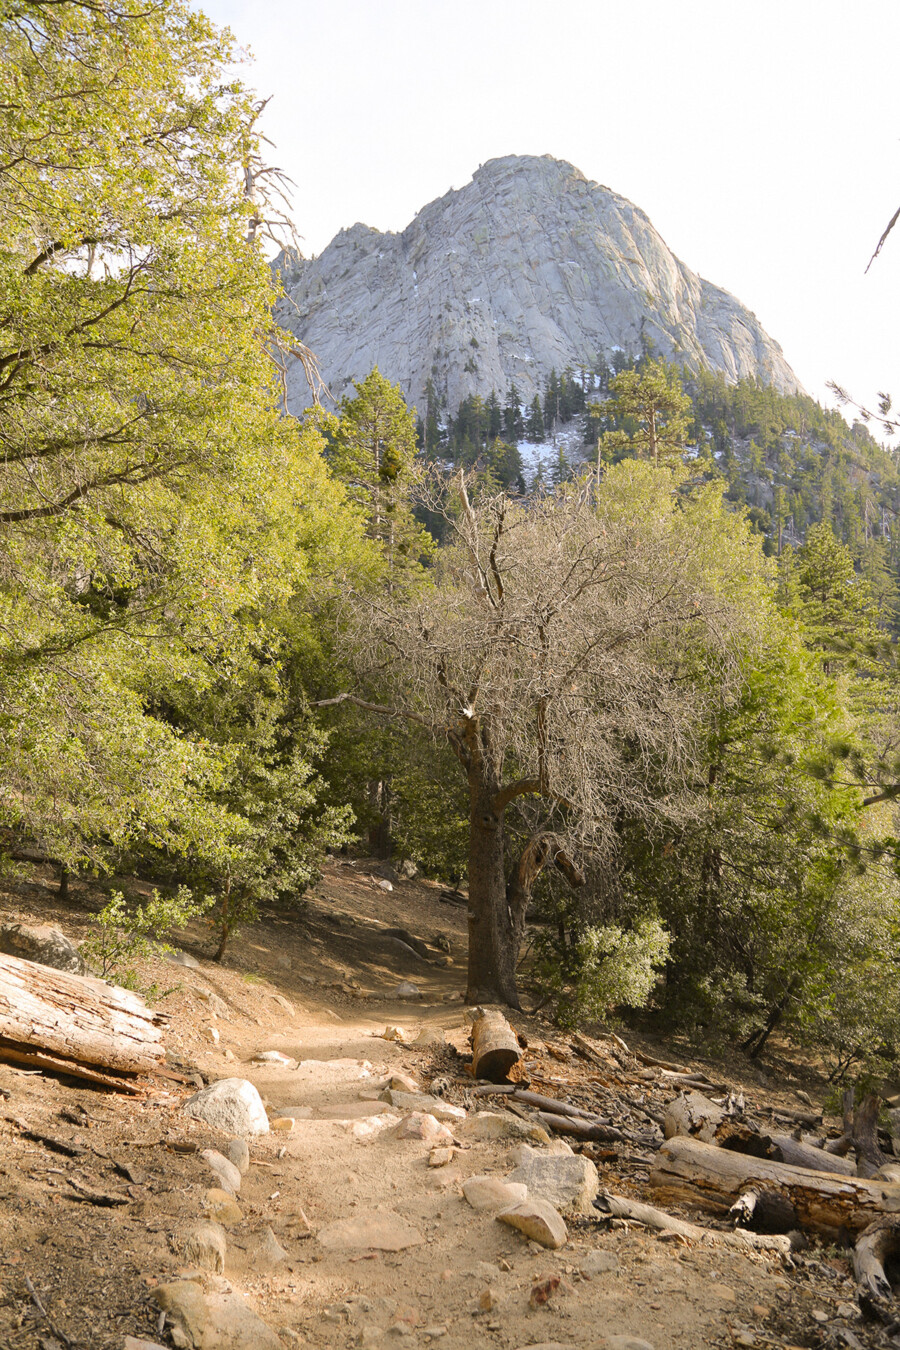 Landscape views from a hiking trail in Idyllwild, California.